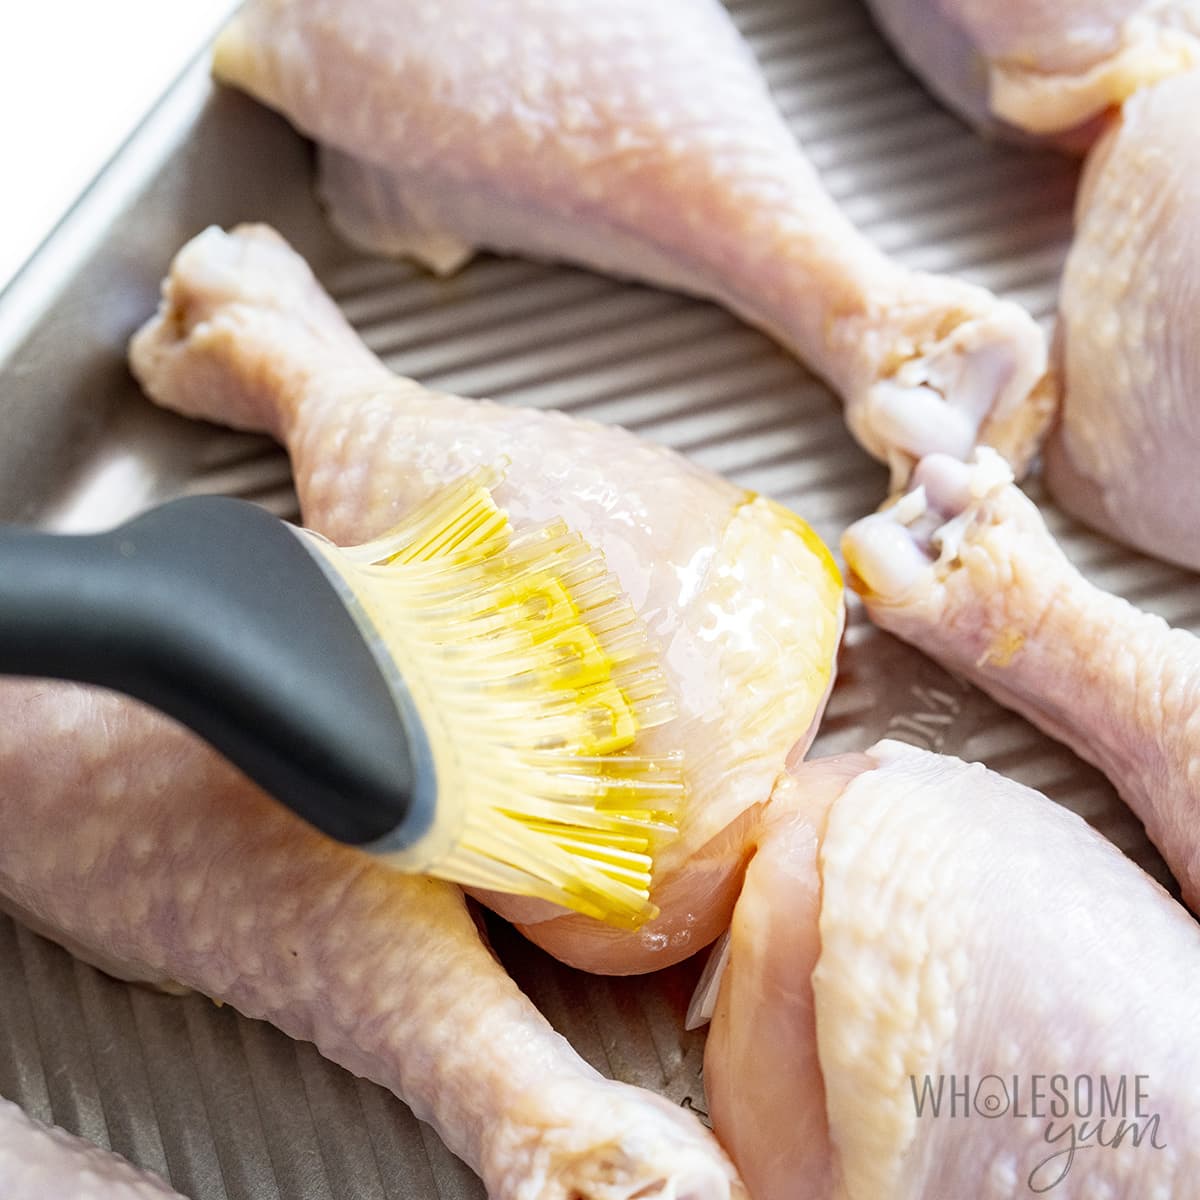 Chicken legs brushed with olive oil.